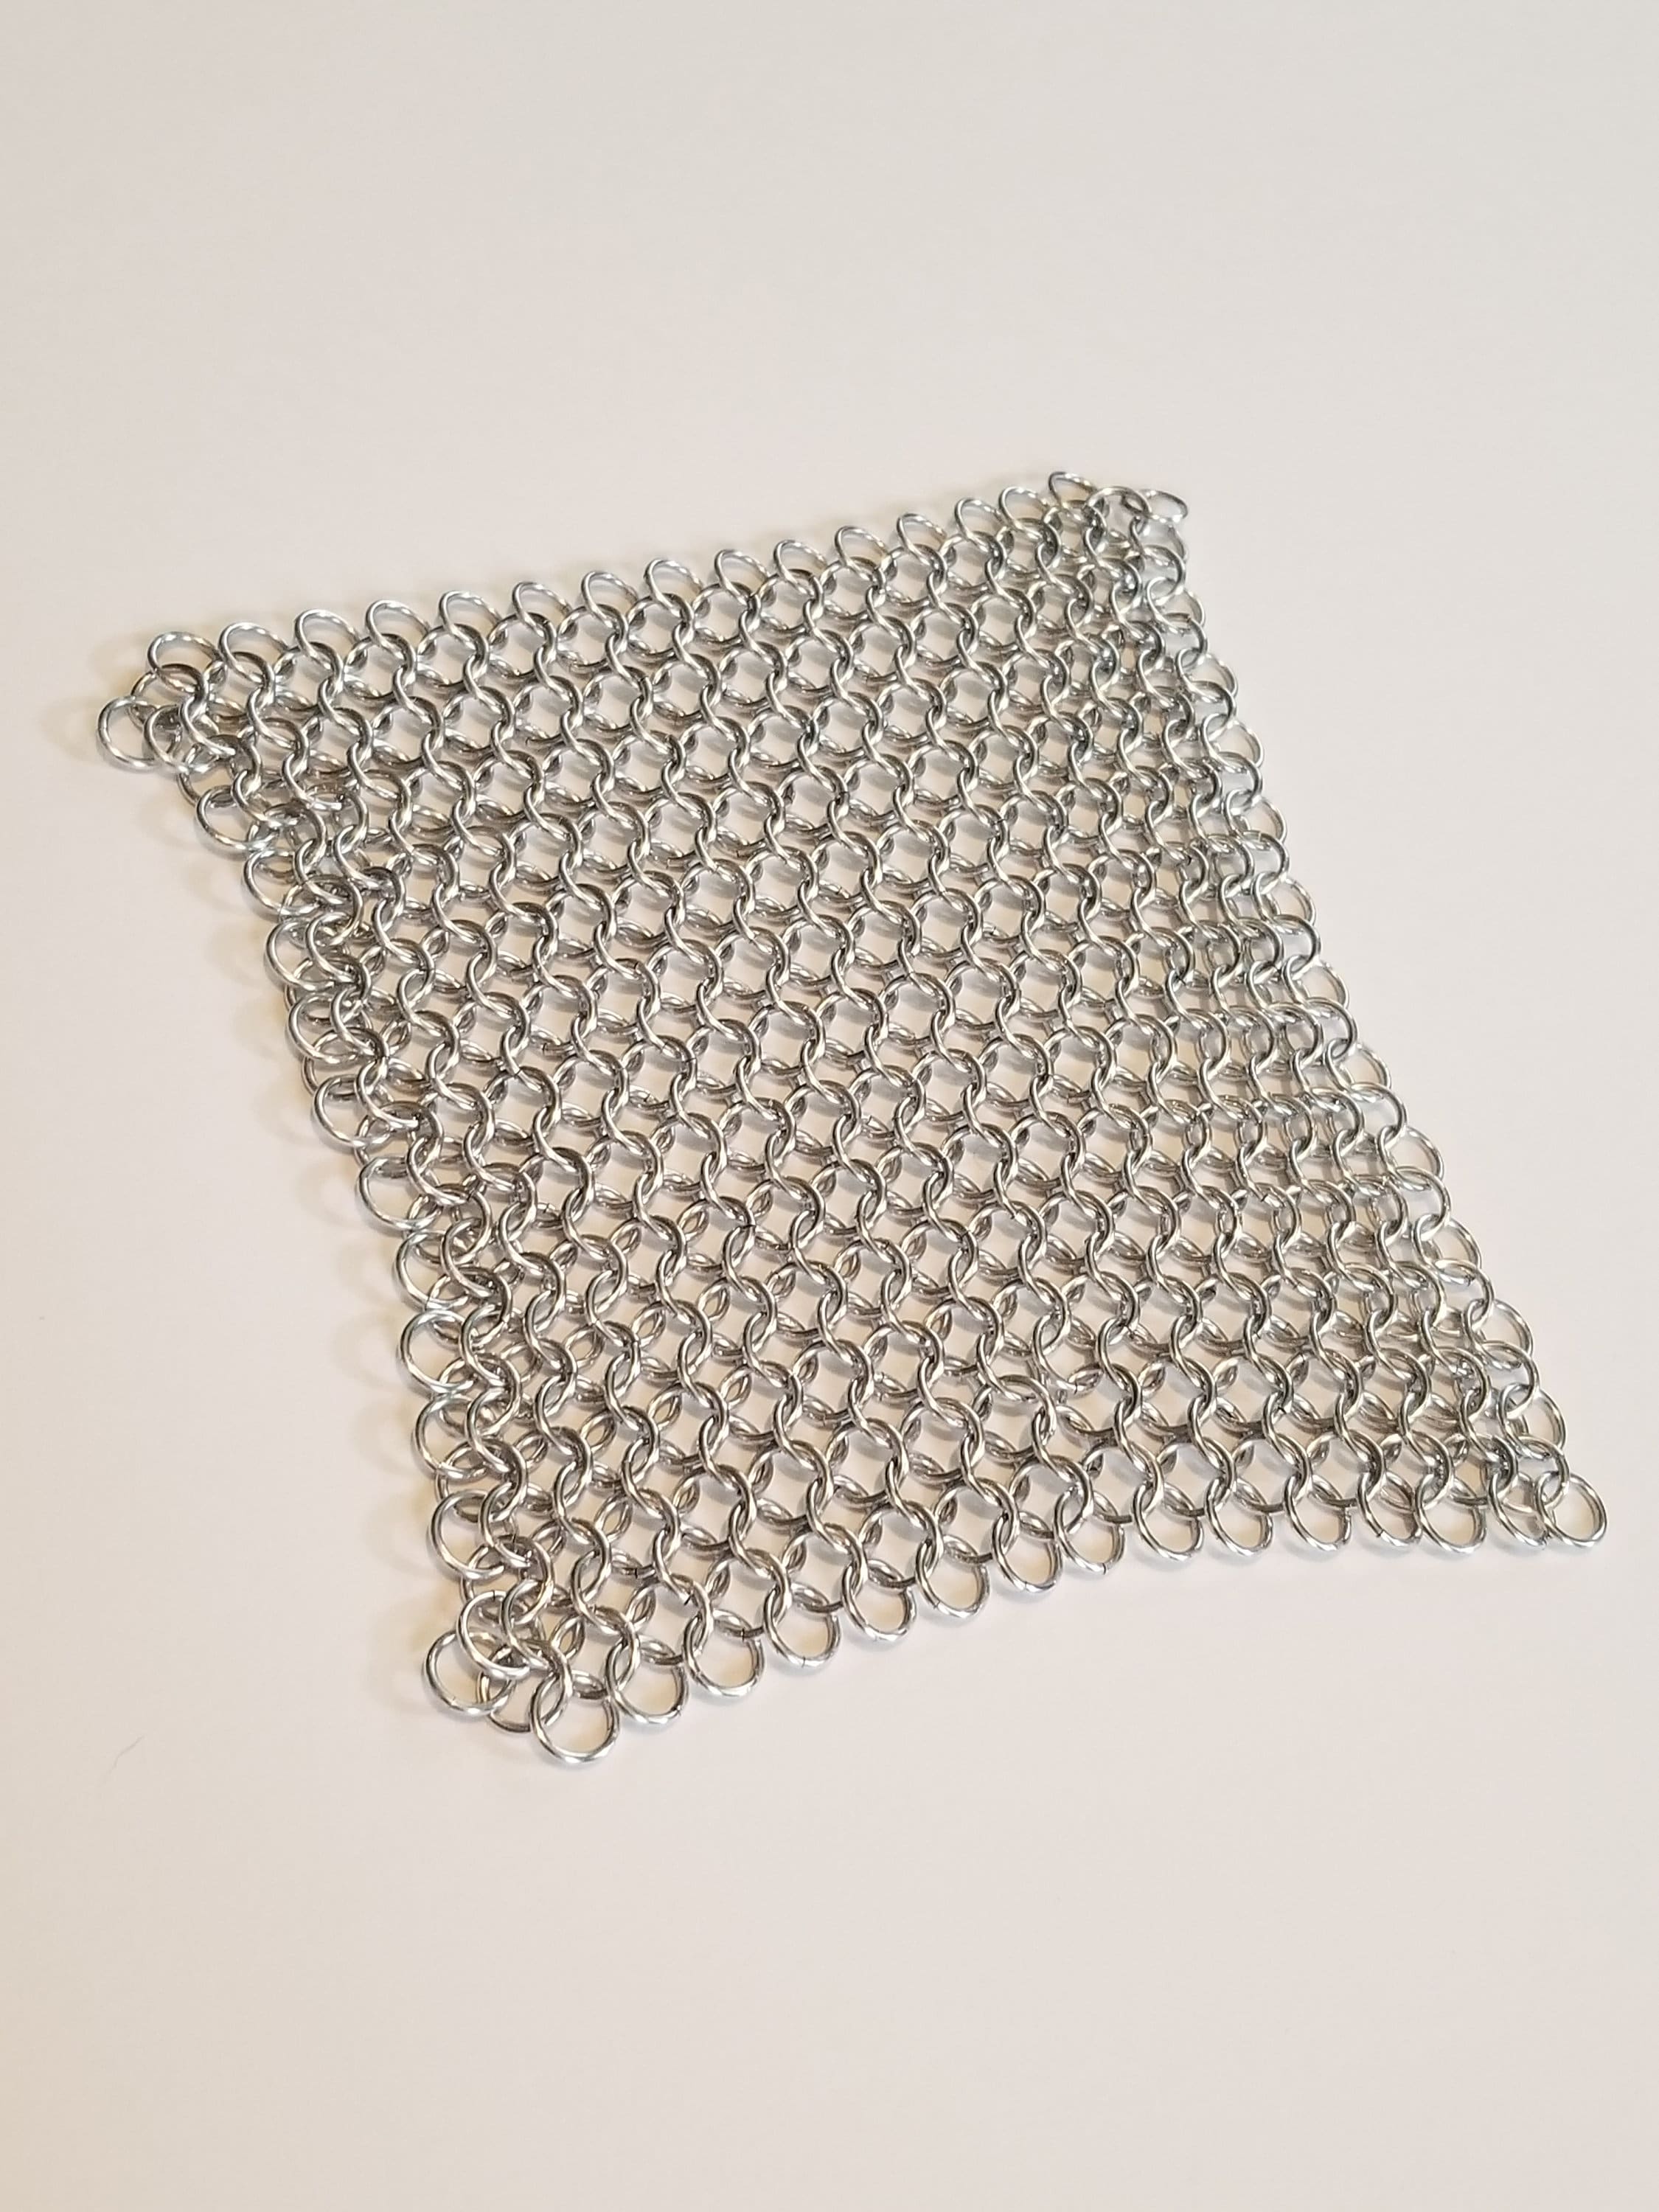 Chain Mail - Classic- Silver - 1 inch Wide - B104 9.75 Inches